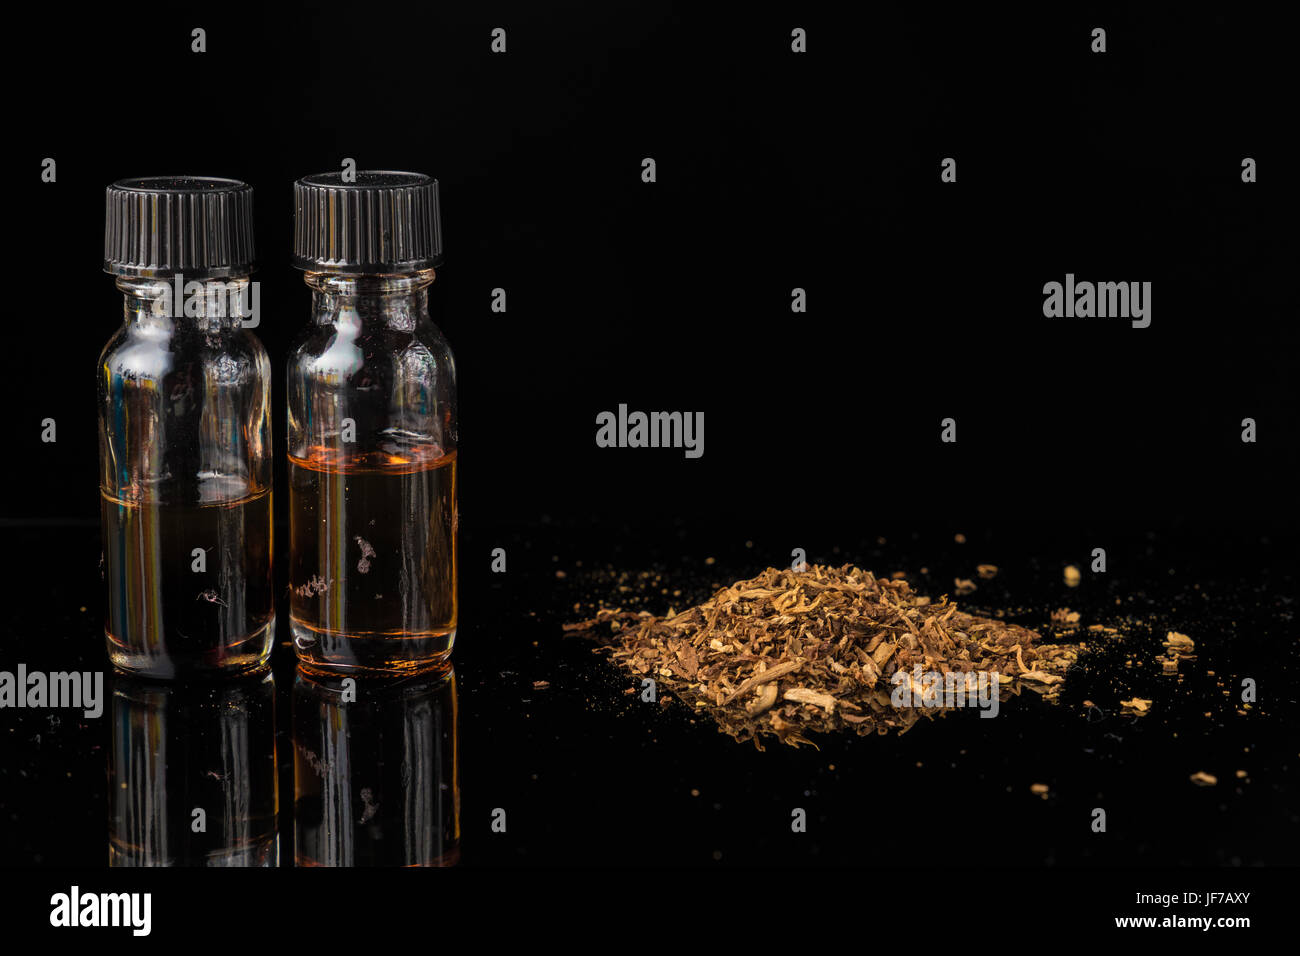 E-liquids next to pile of grinded tobacco leaves Stock Photo